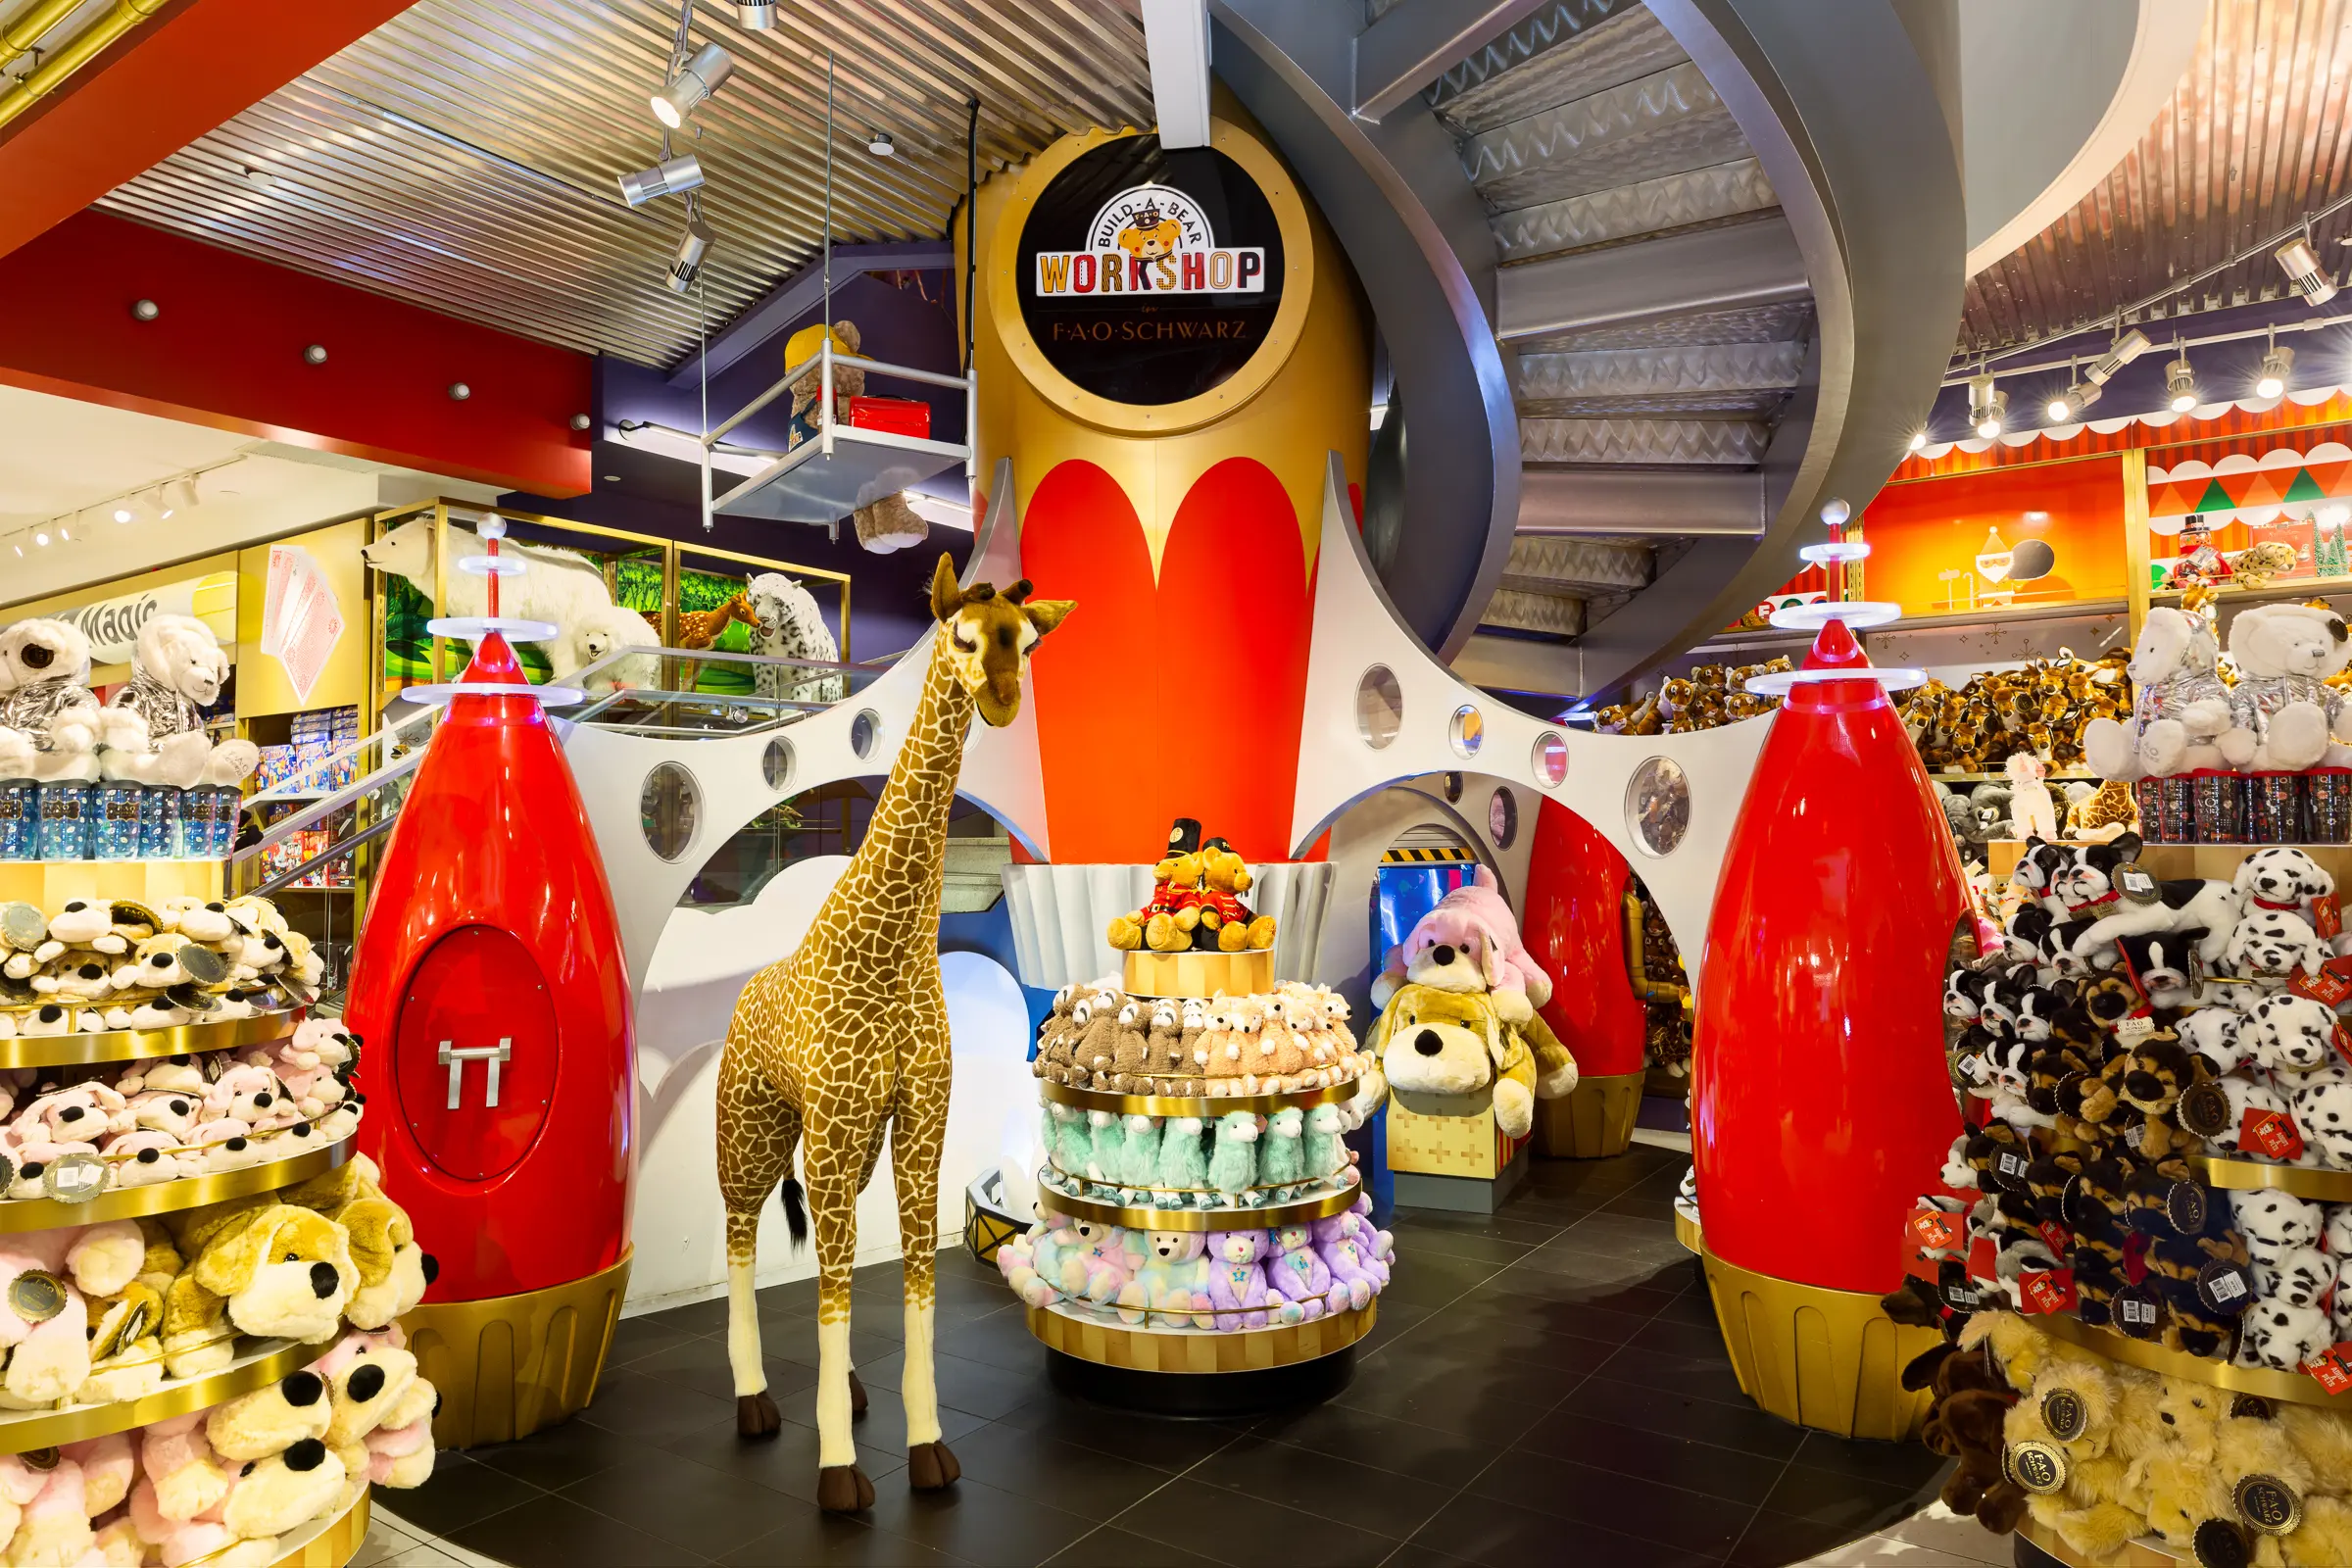 You can spend a toy-filled night inside FAO Schwarz